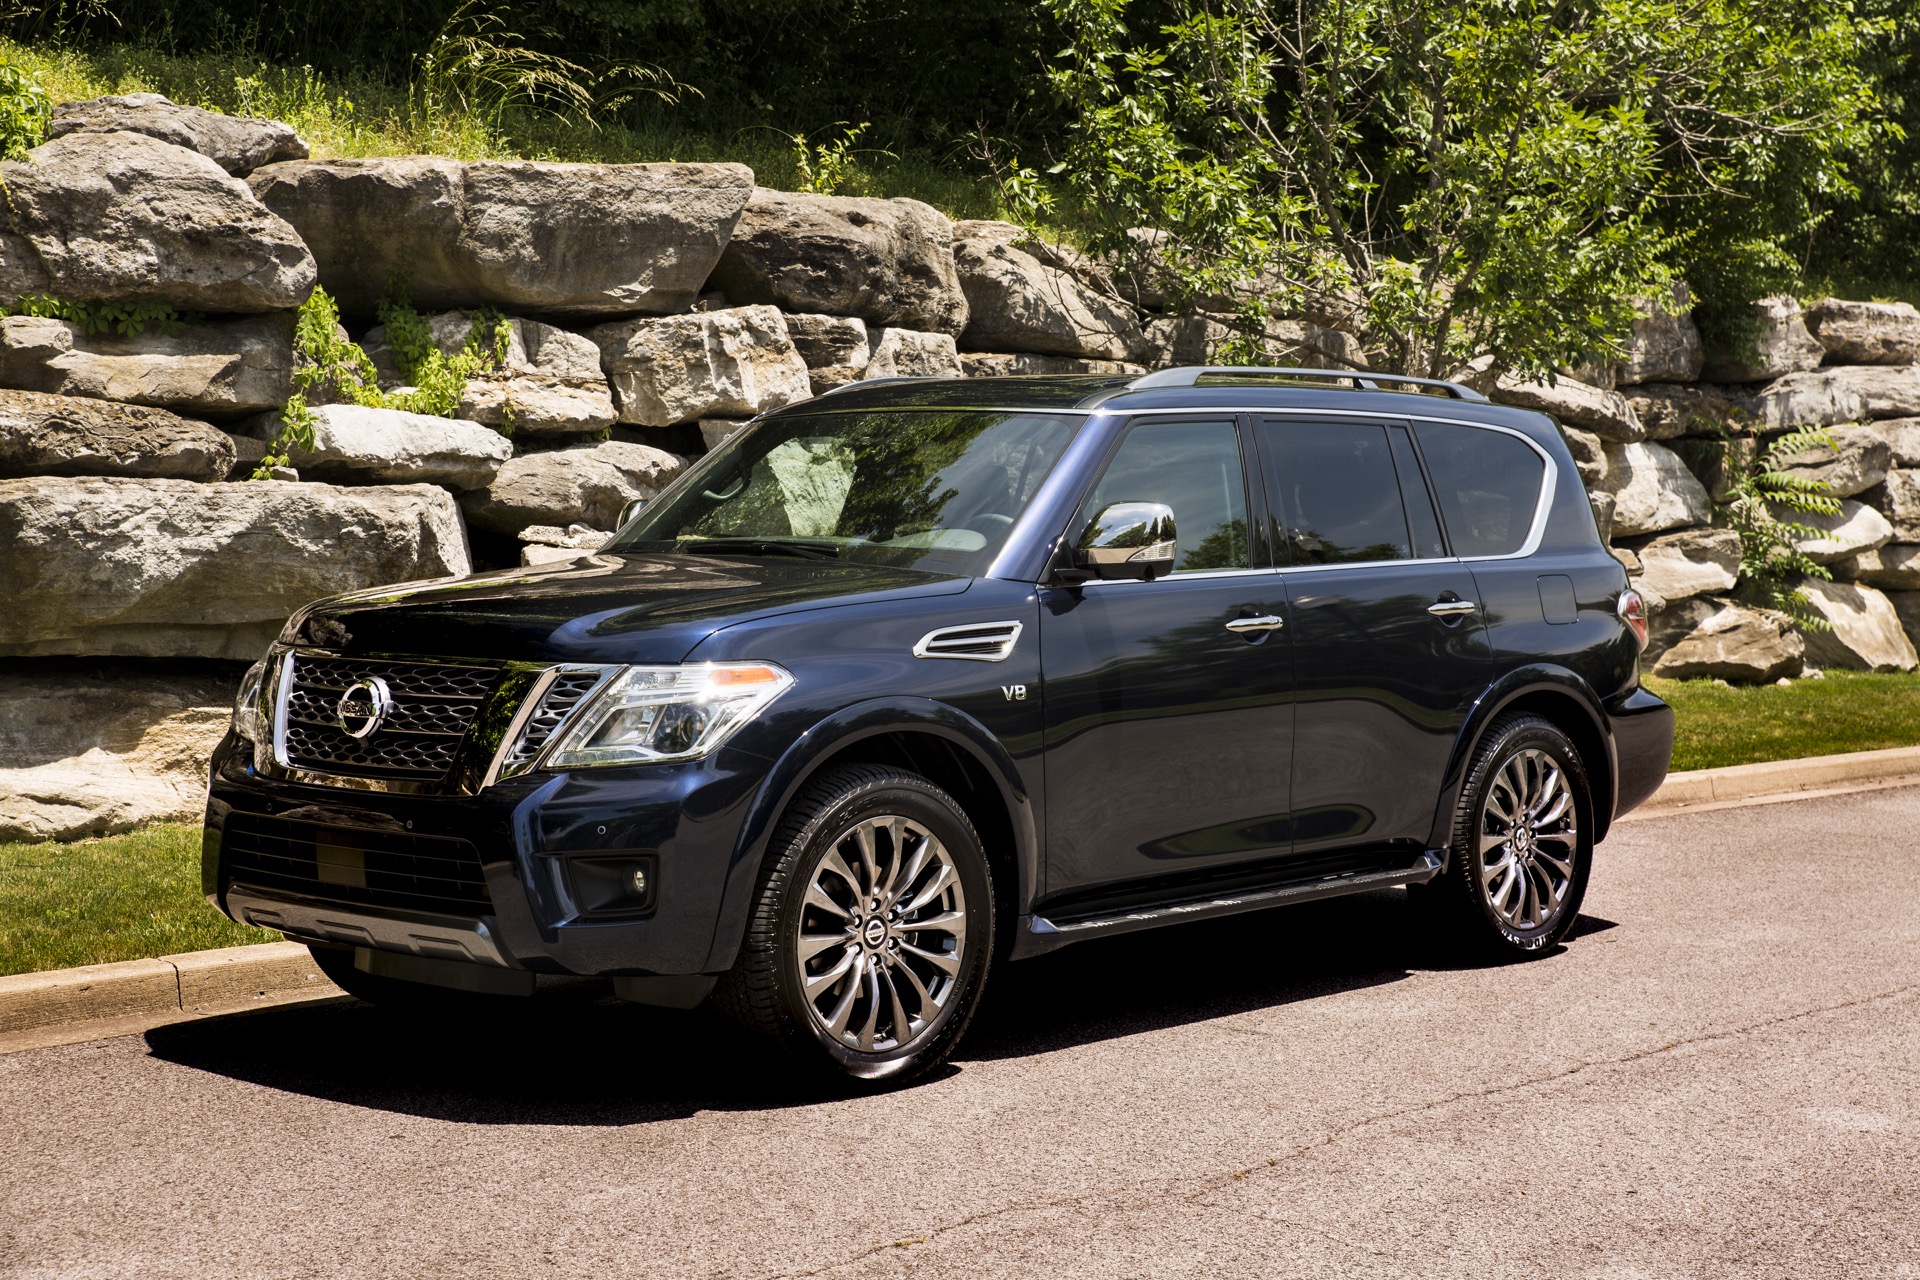 New and Used Nissan Armada Prices, Photos, Reviews, Specs The Car